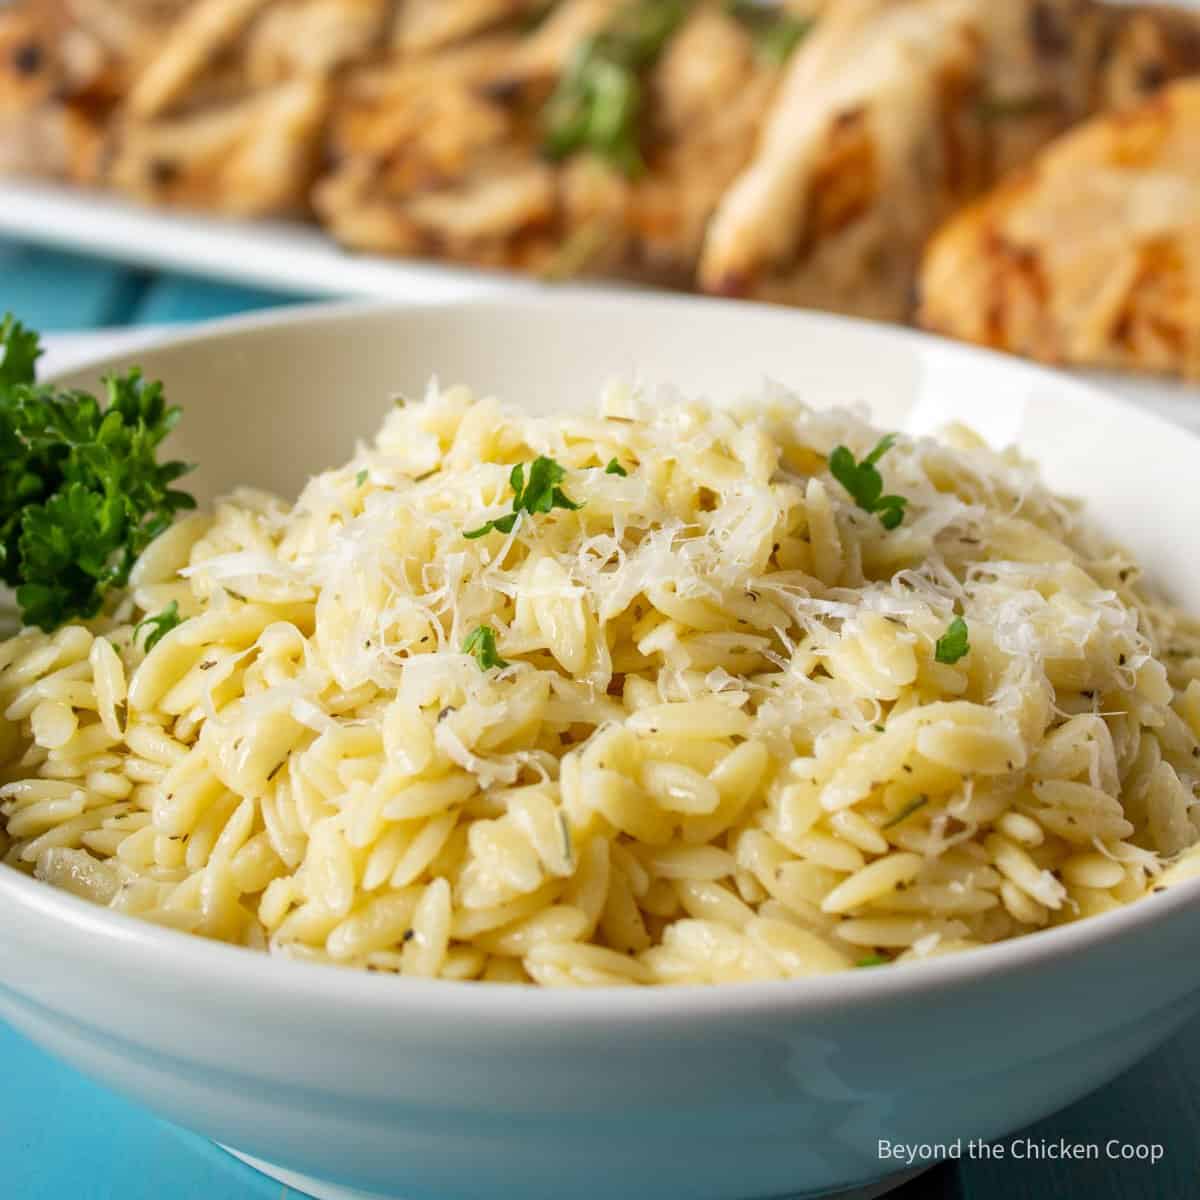 A dish filled with orzo topped with cheese.